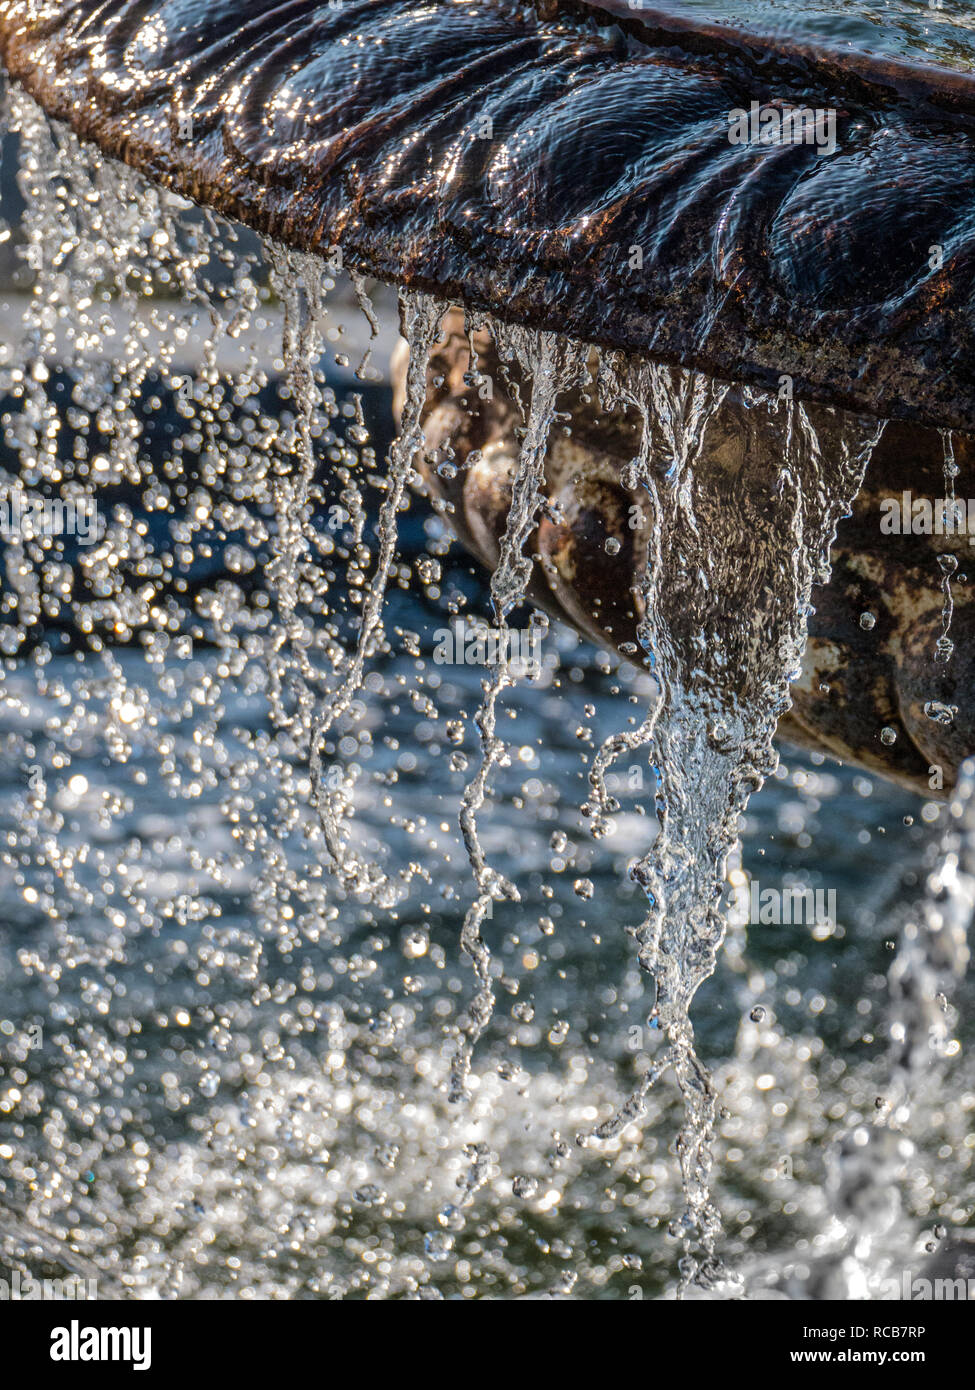 WATER FOUNTAIN DROPS DROPLETS Water flowing off an ornamental old weathered limestone garden feature water fountain in bright sunlit situation Stock Photo